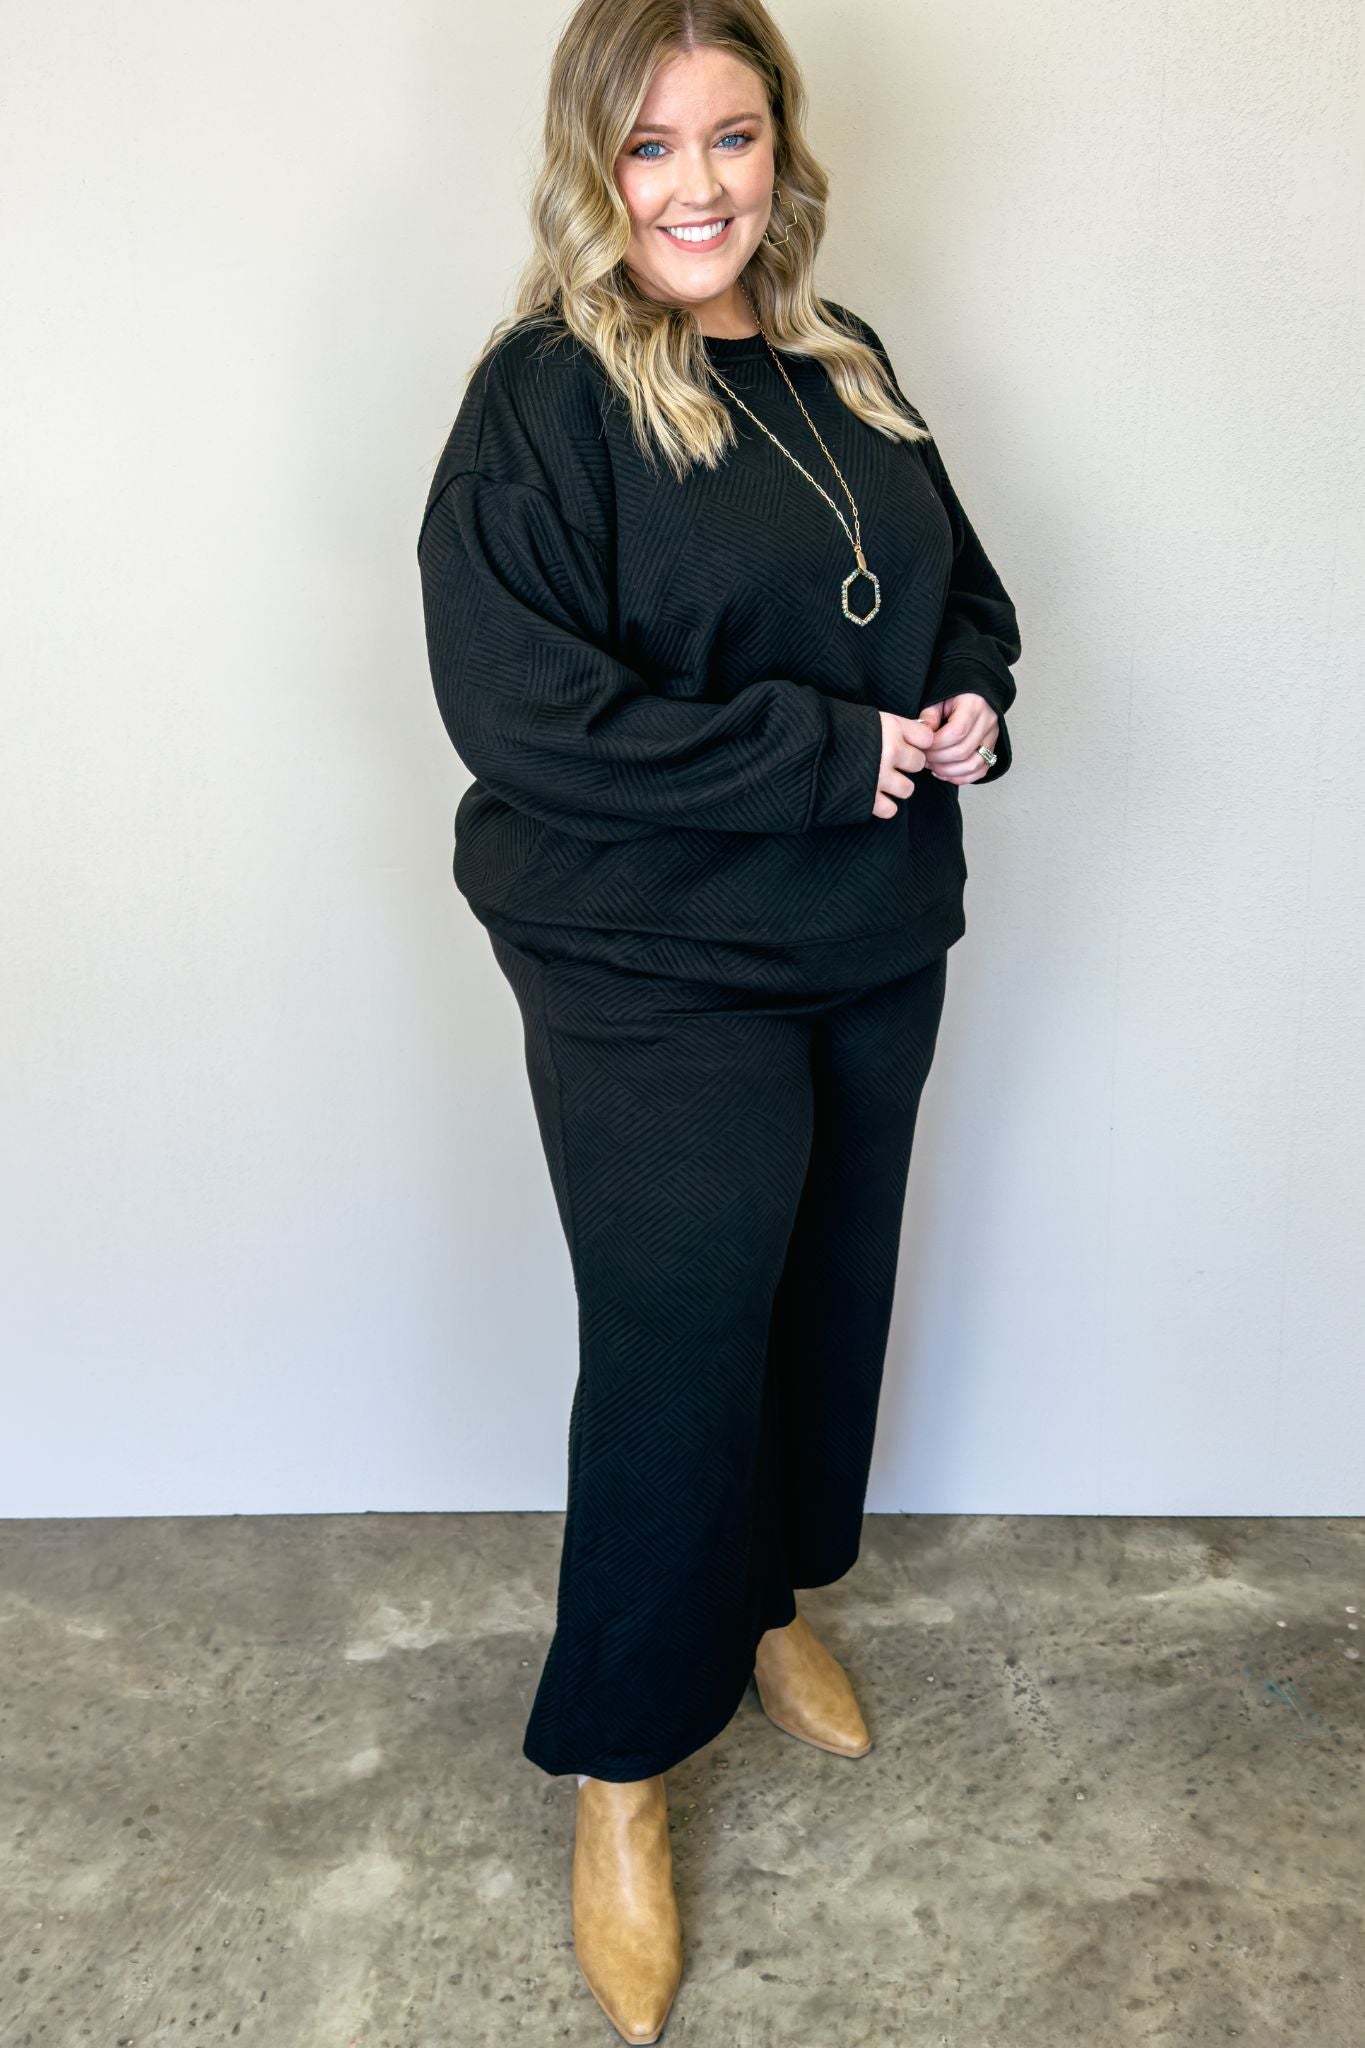 Black wide leg pants made from soft, stretchy fabric. Versatile set with textured top and crop pant. Perfect for casual or date night. Relaxed fit top, wide leg pants with pockets. Long sleeve, easy care.